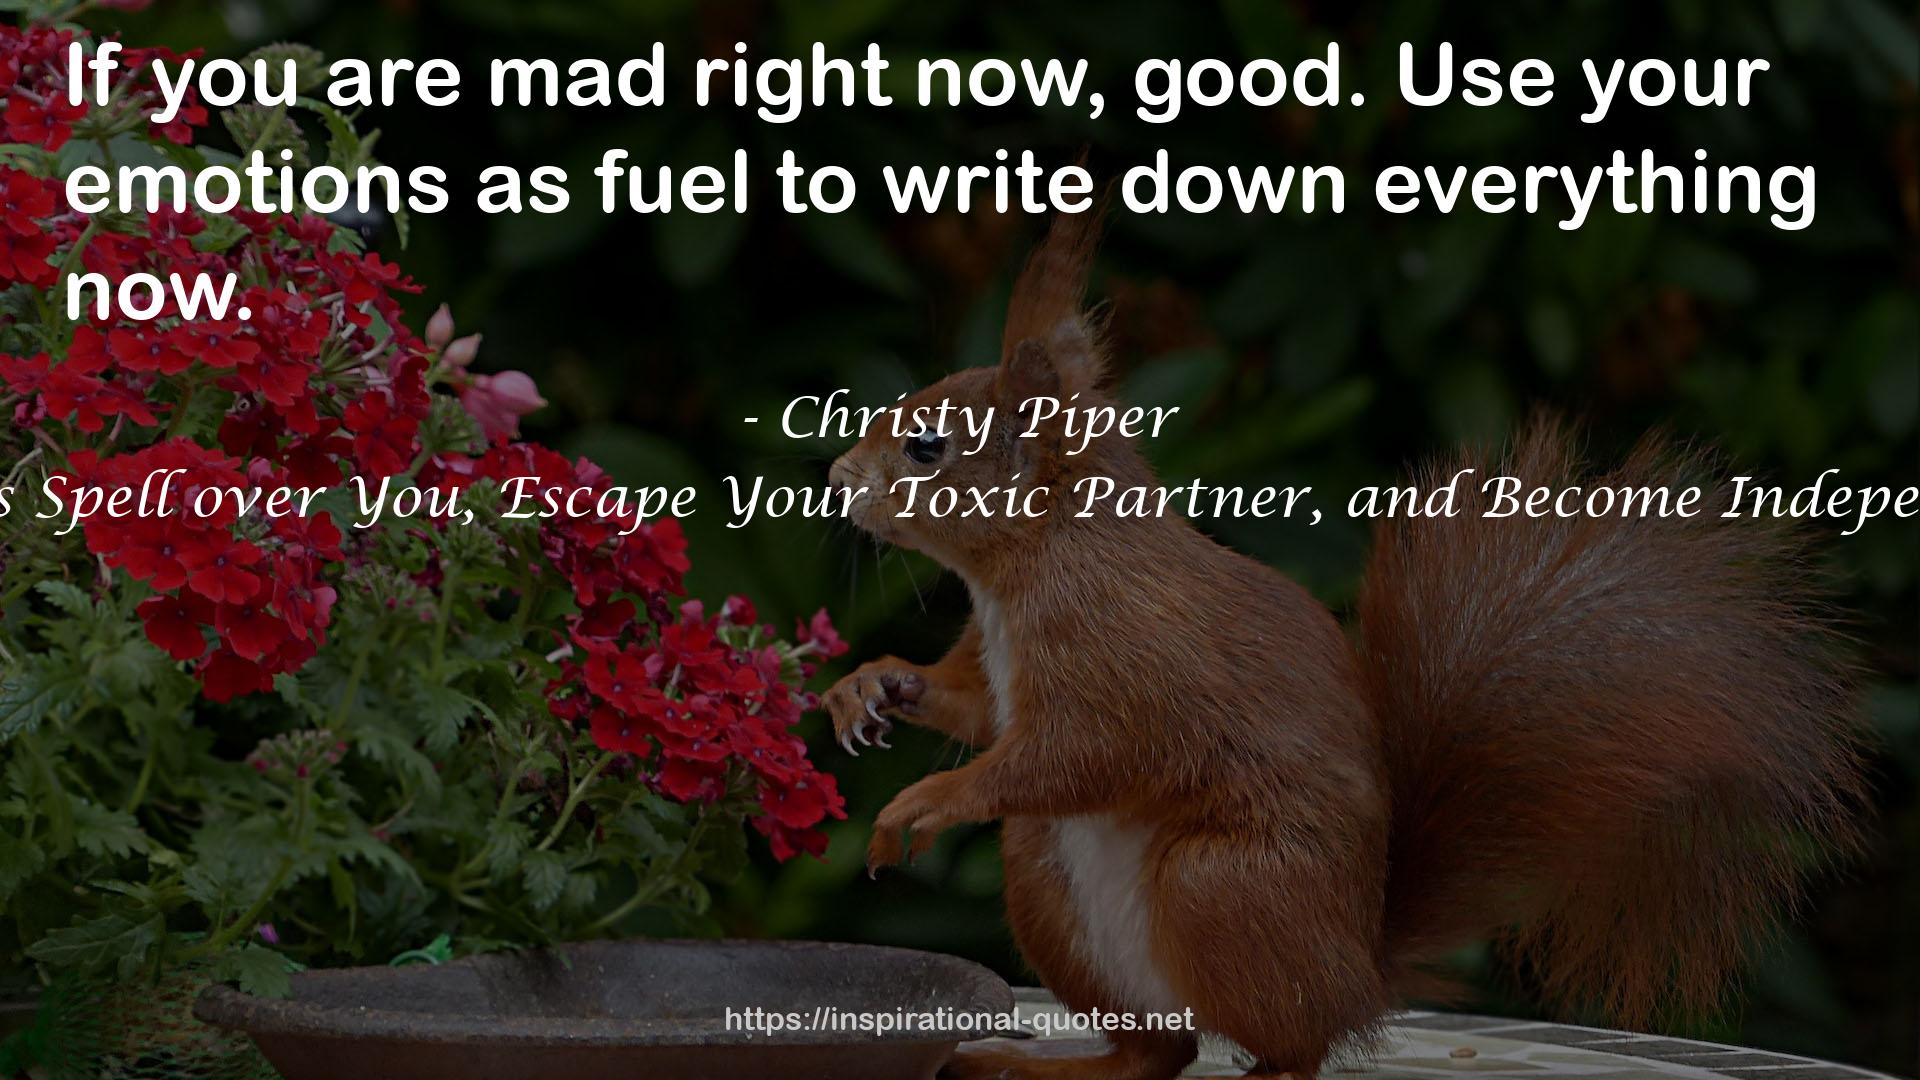 Christy Piper QUOTES